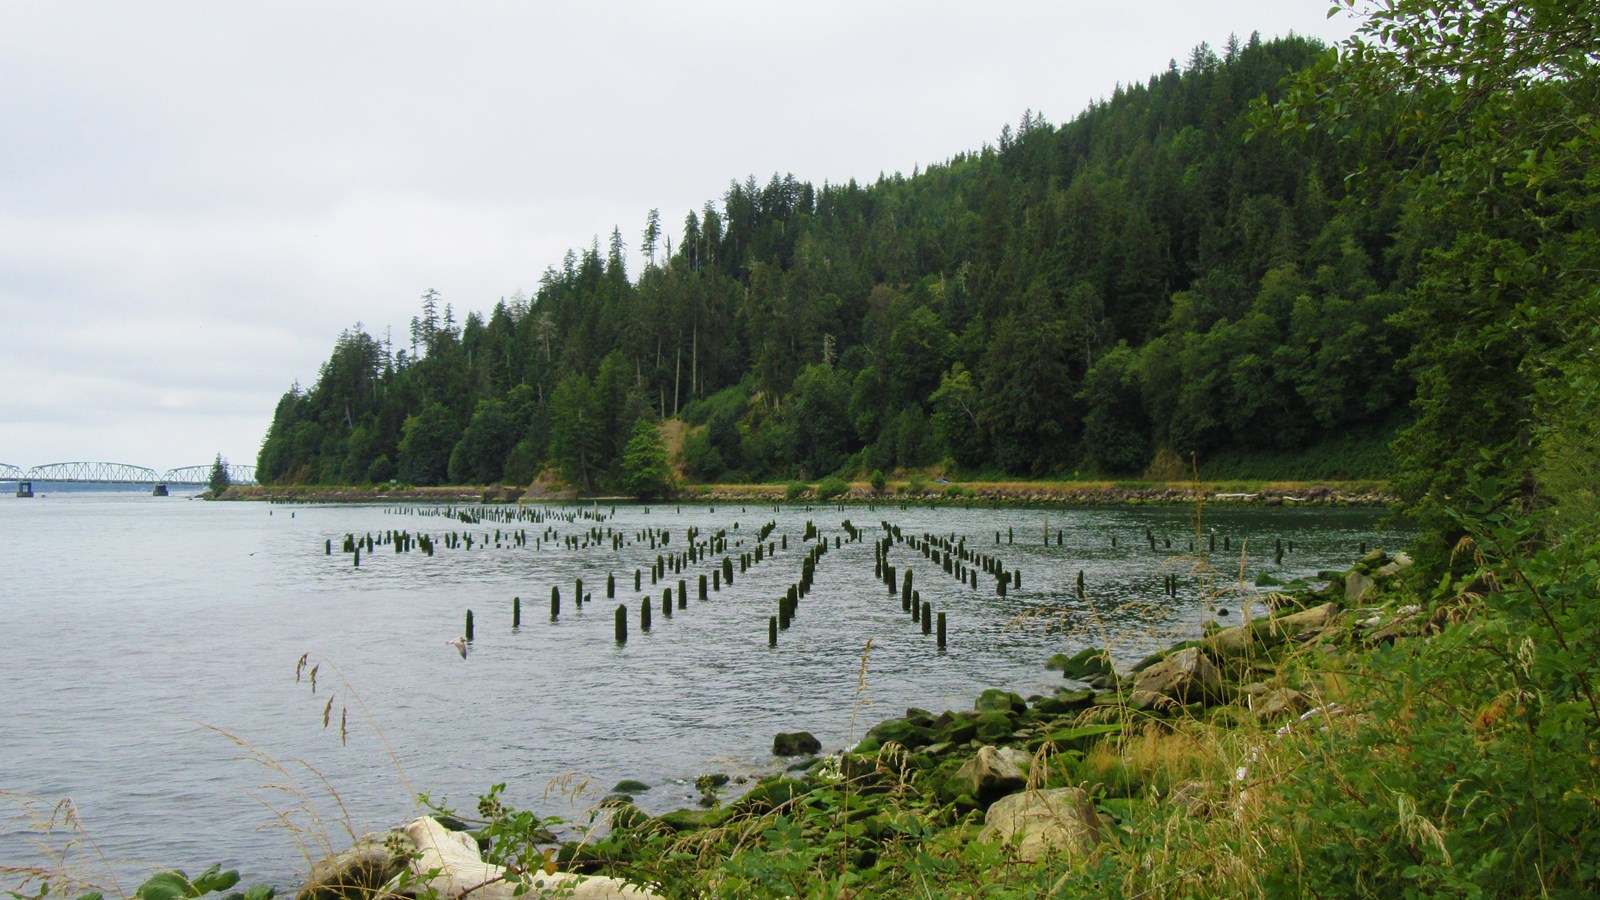 wide river with wooden pilings sticking out of the water